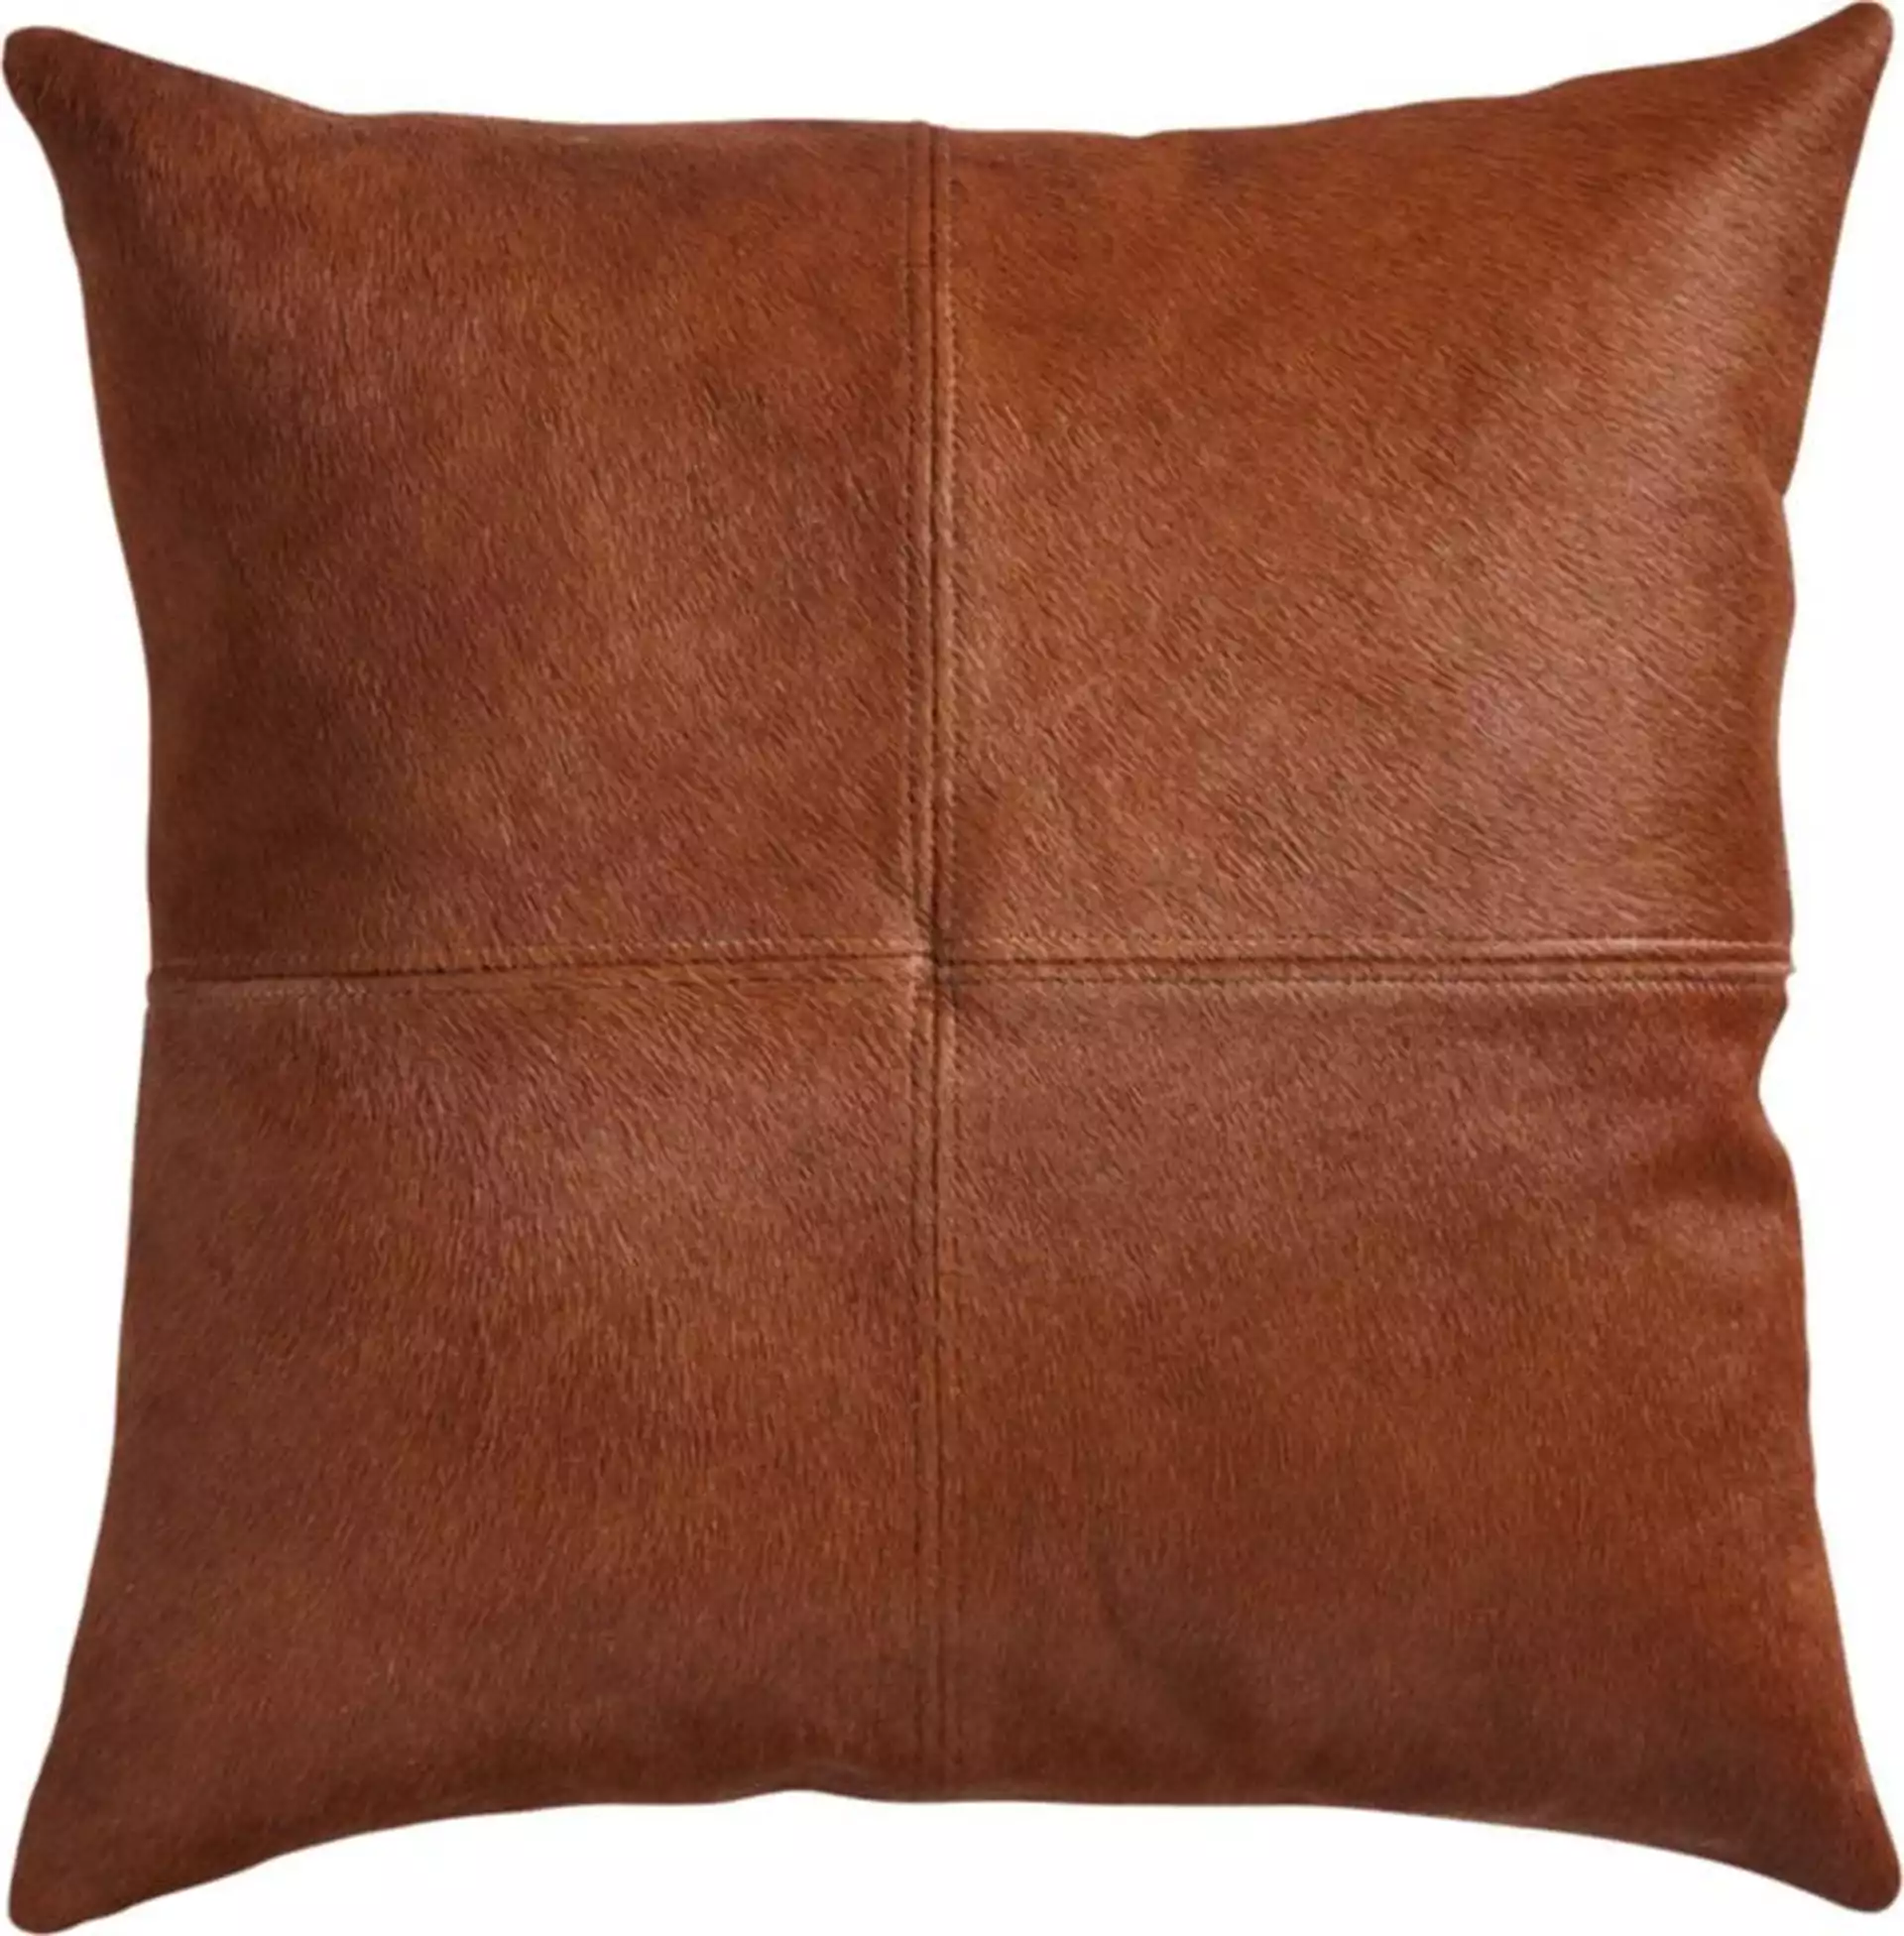 18" Light Brown Cowhide Pillow with Down-Alternative Insert